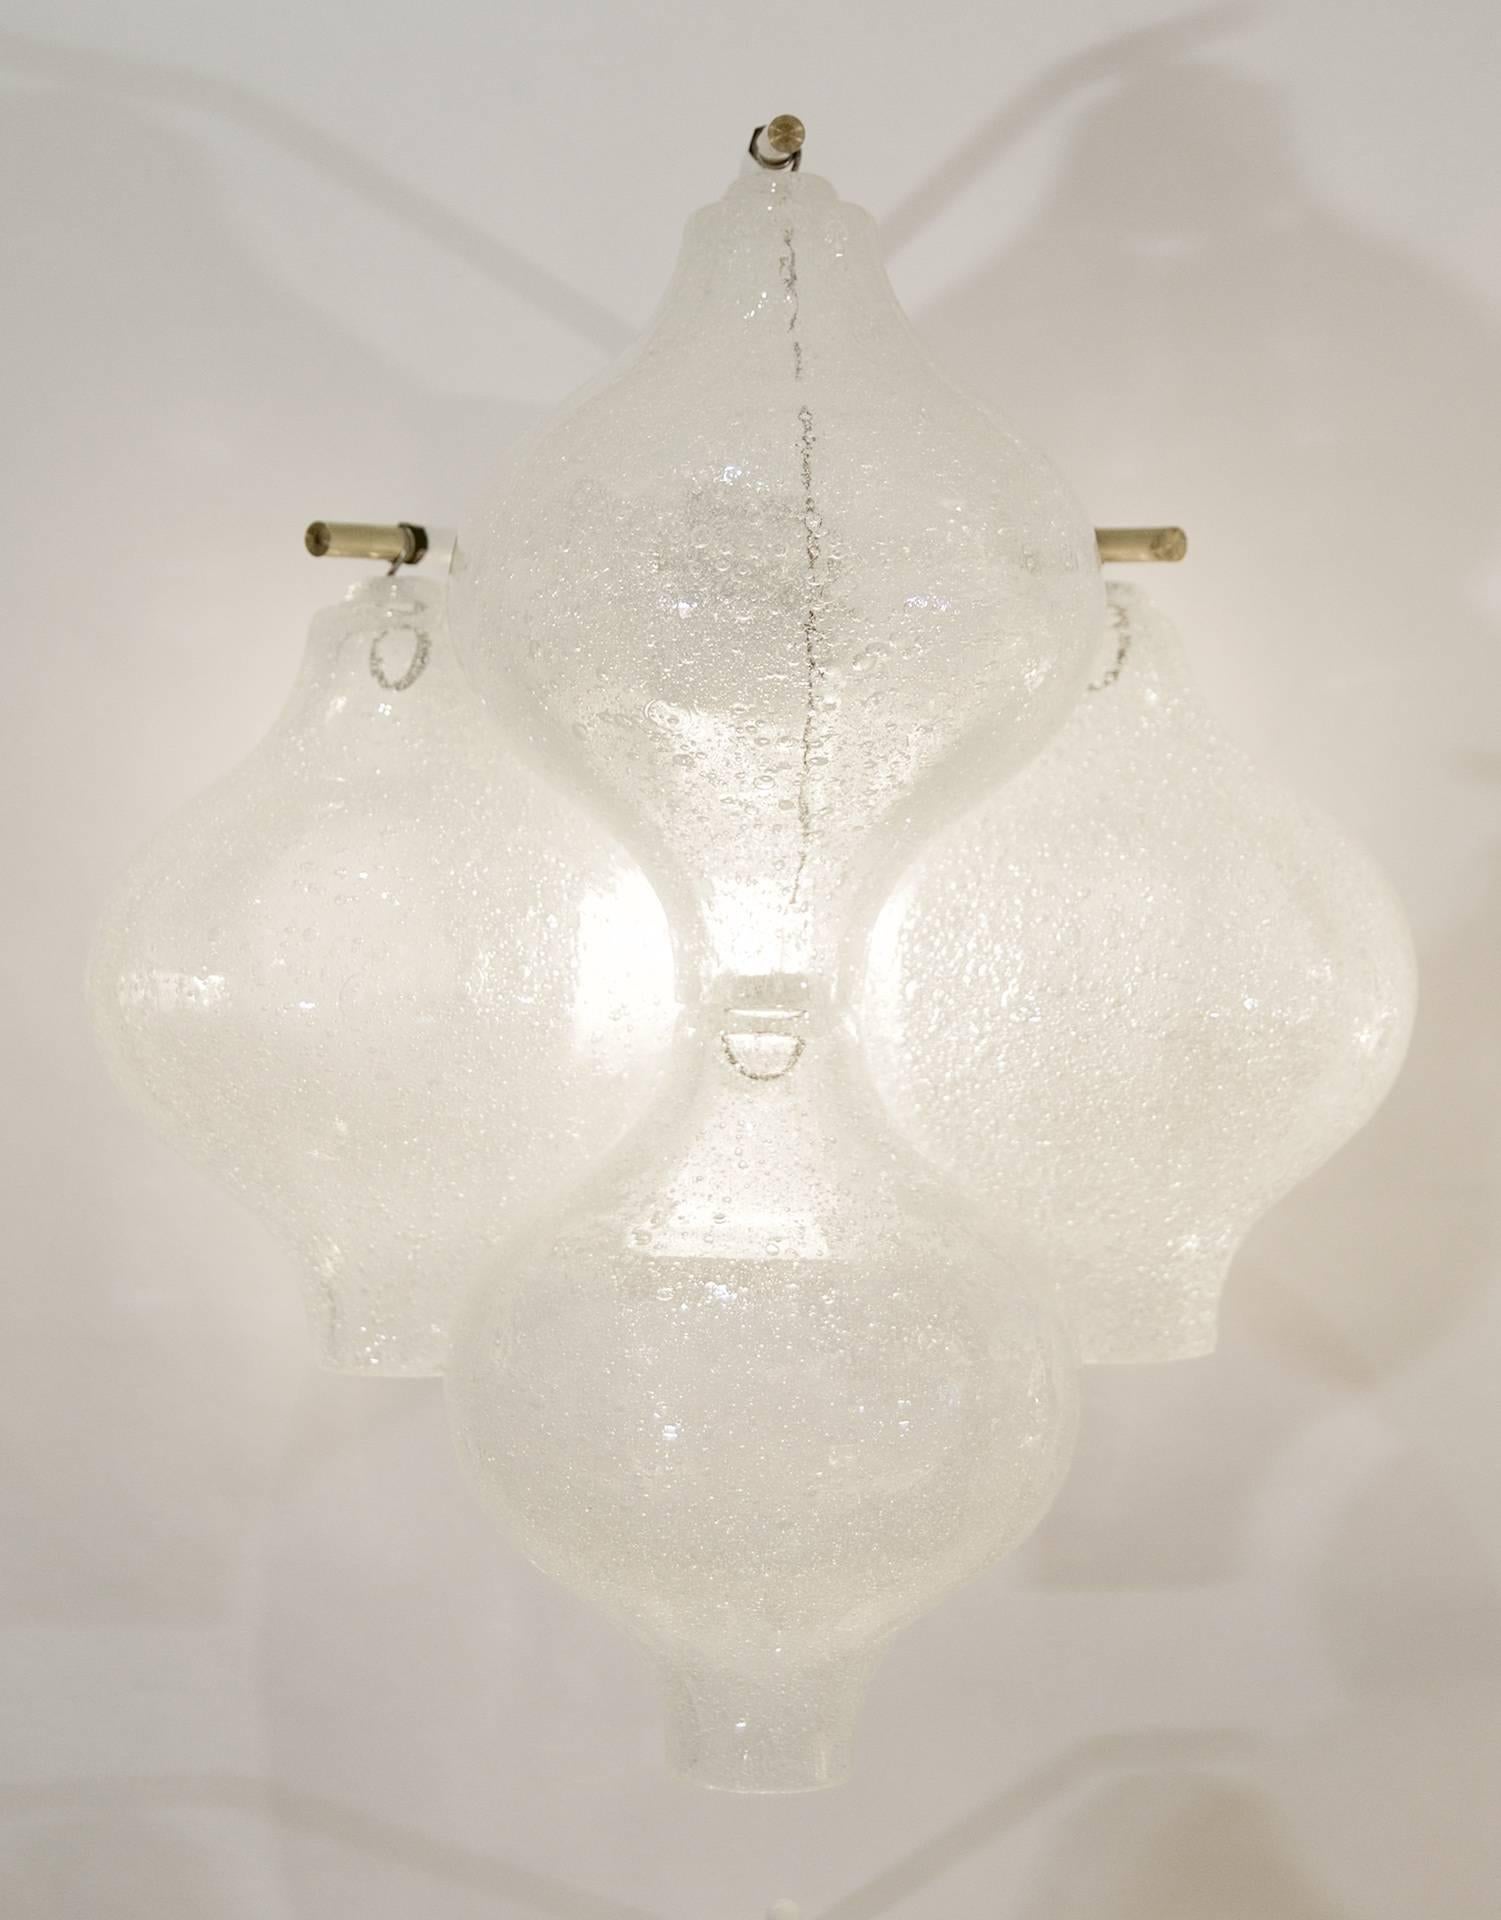 Exquisite Kalmar sconces, each with four pieces of Tulipan glass suspended from brass mounting pins on the white enameled backplate.

Each sconce takes an E-14 base bulbs up to 40 watts per bulb. New wiring.

Please note the price listed is per